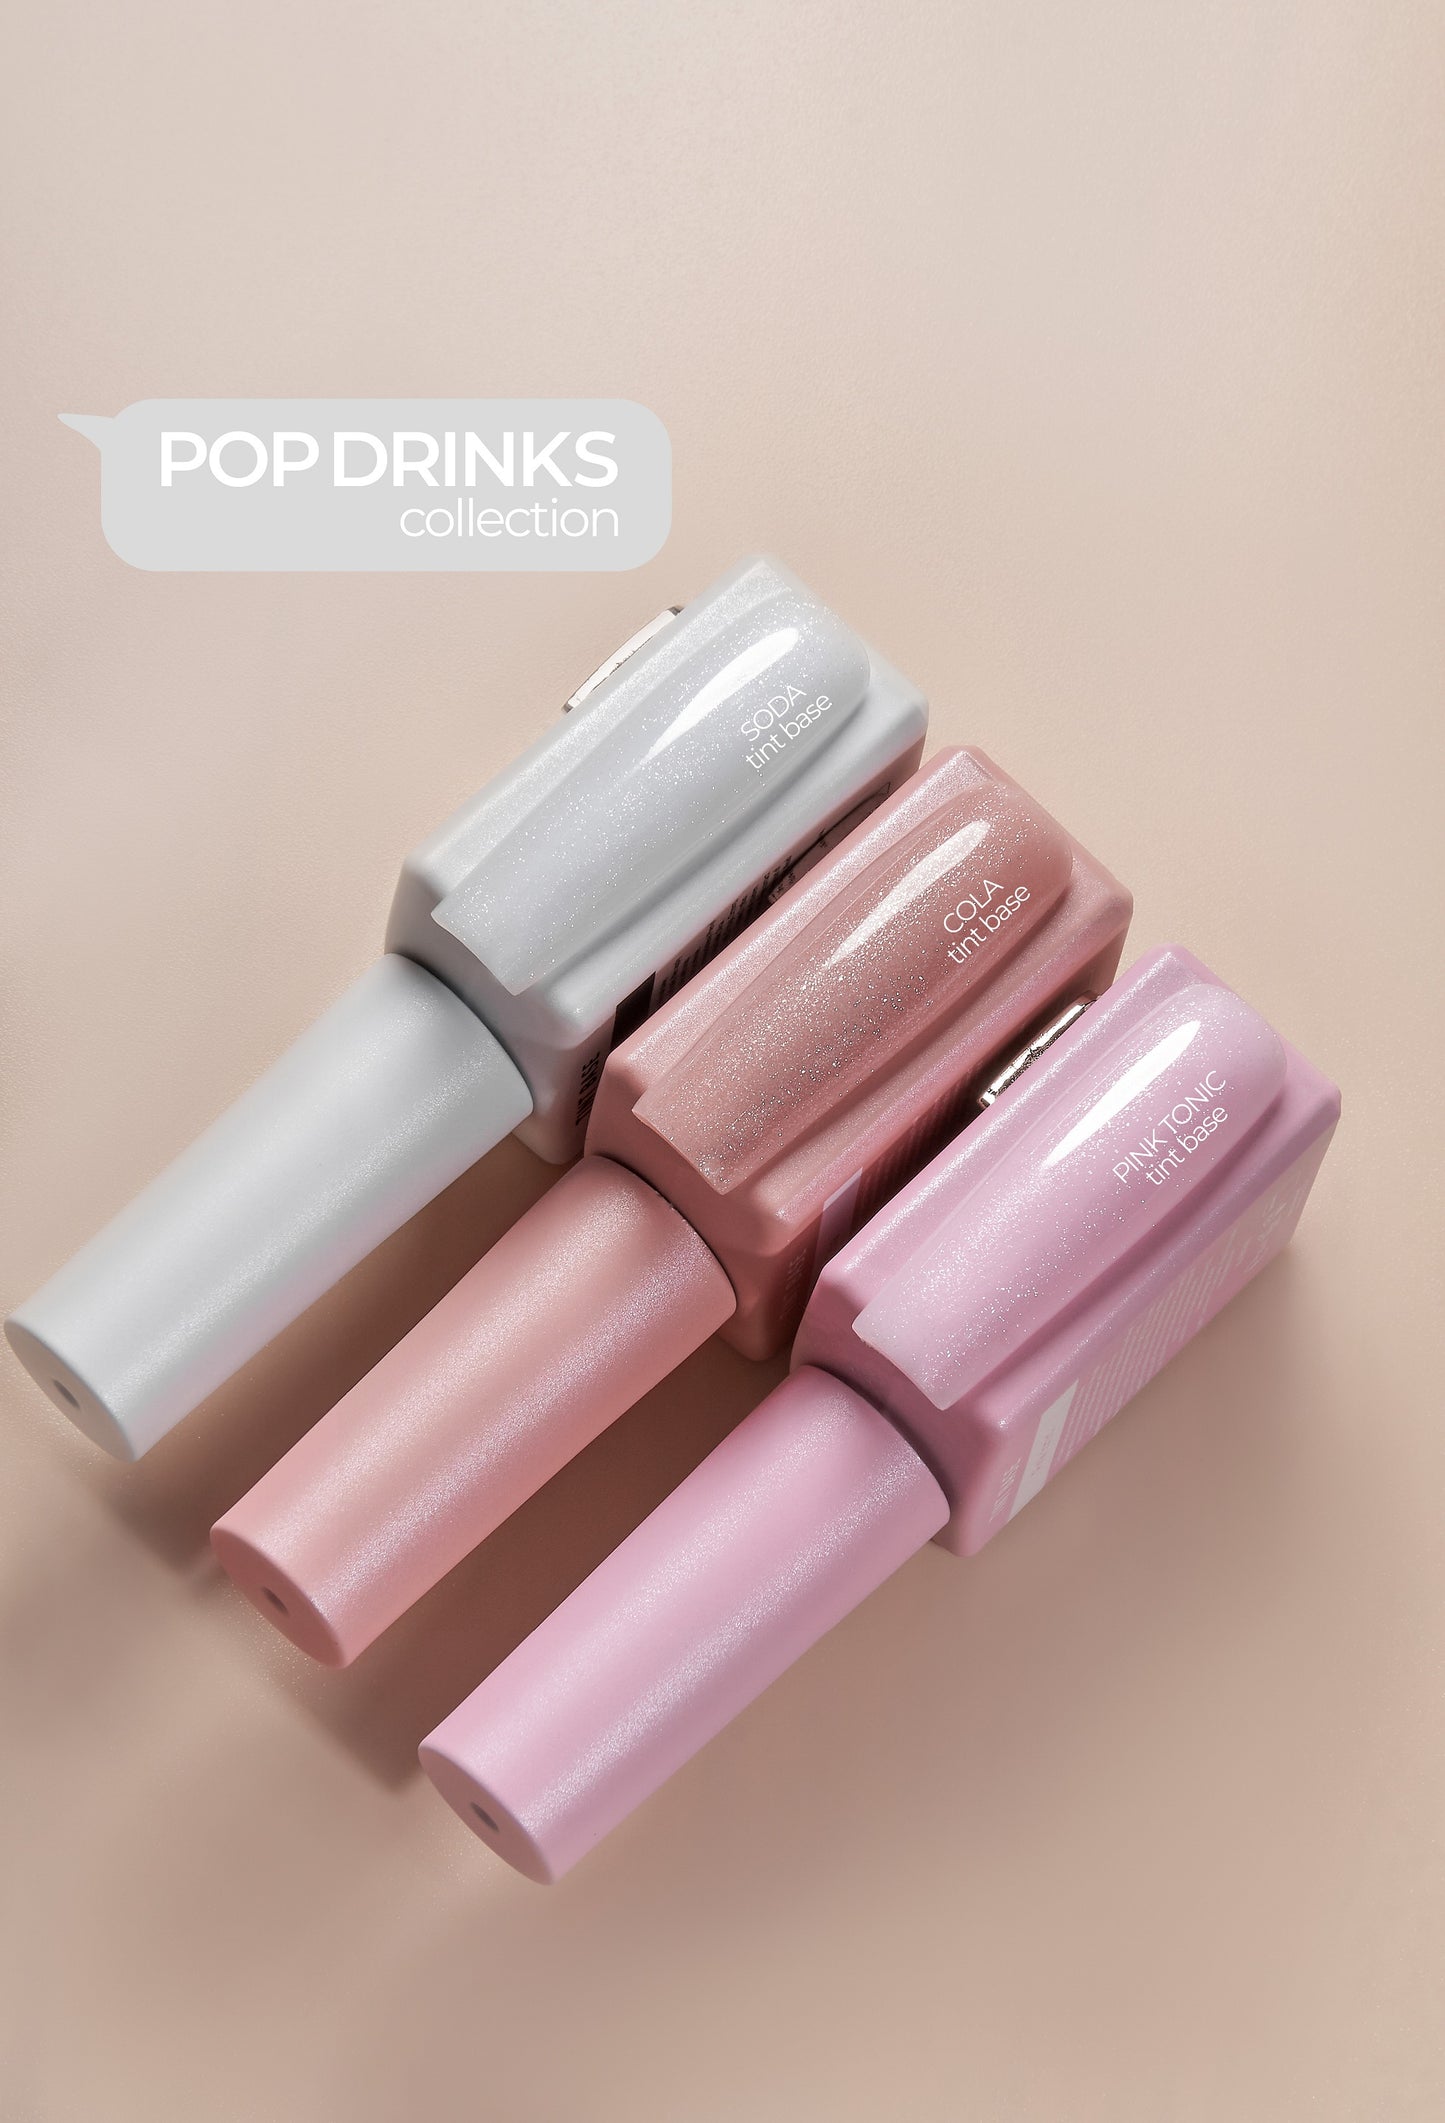 HELLO Tint base PINK TONIC Pop Drinks colección